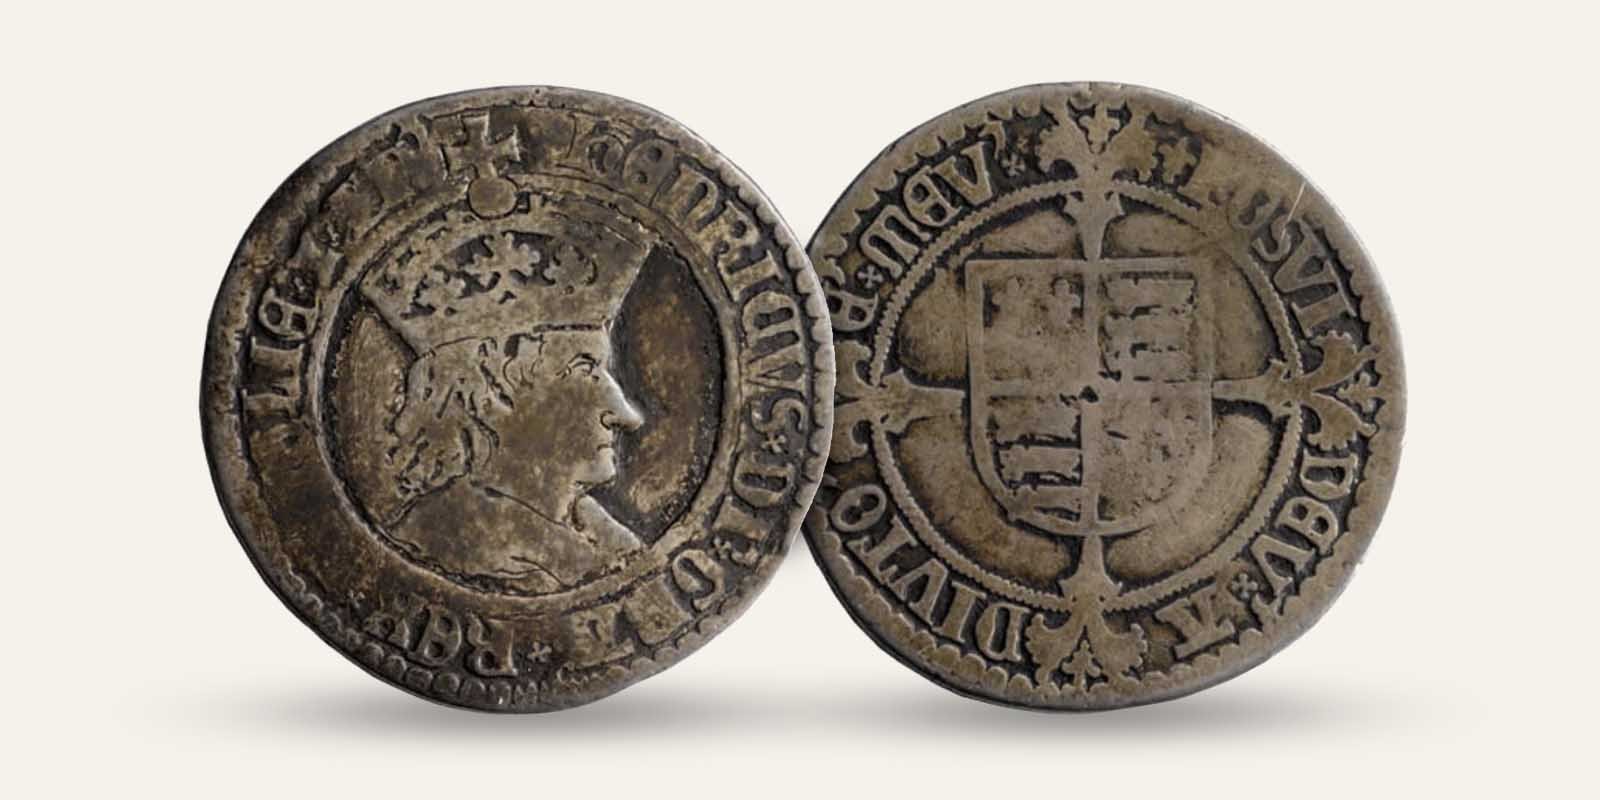 article-2-1953-first-henry-vii-shilling.jpg